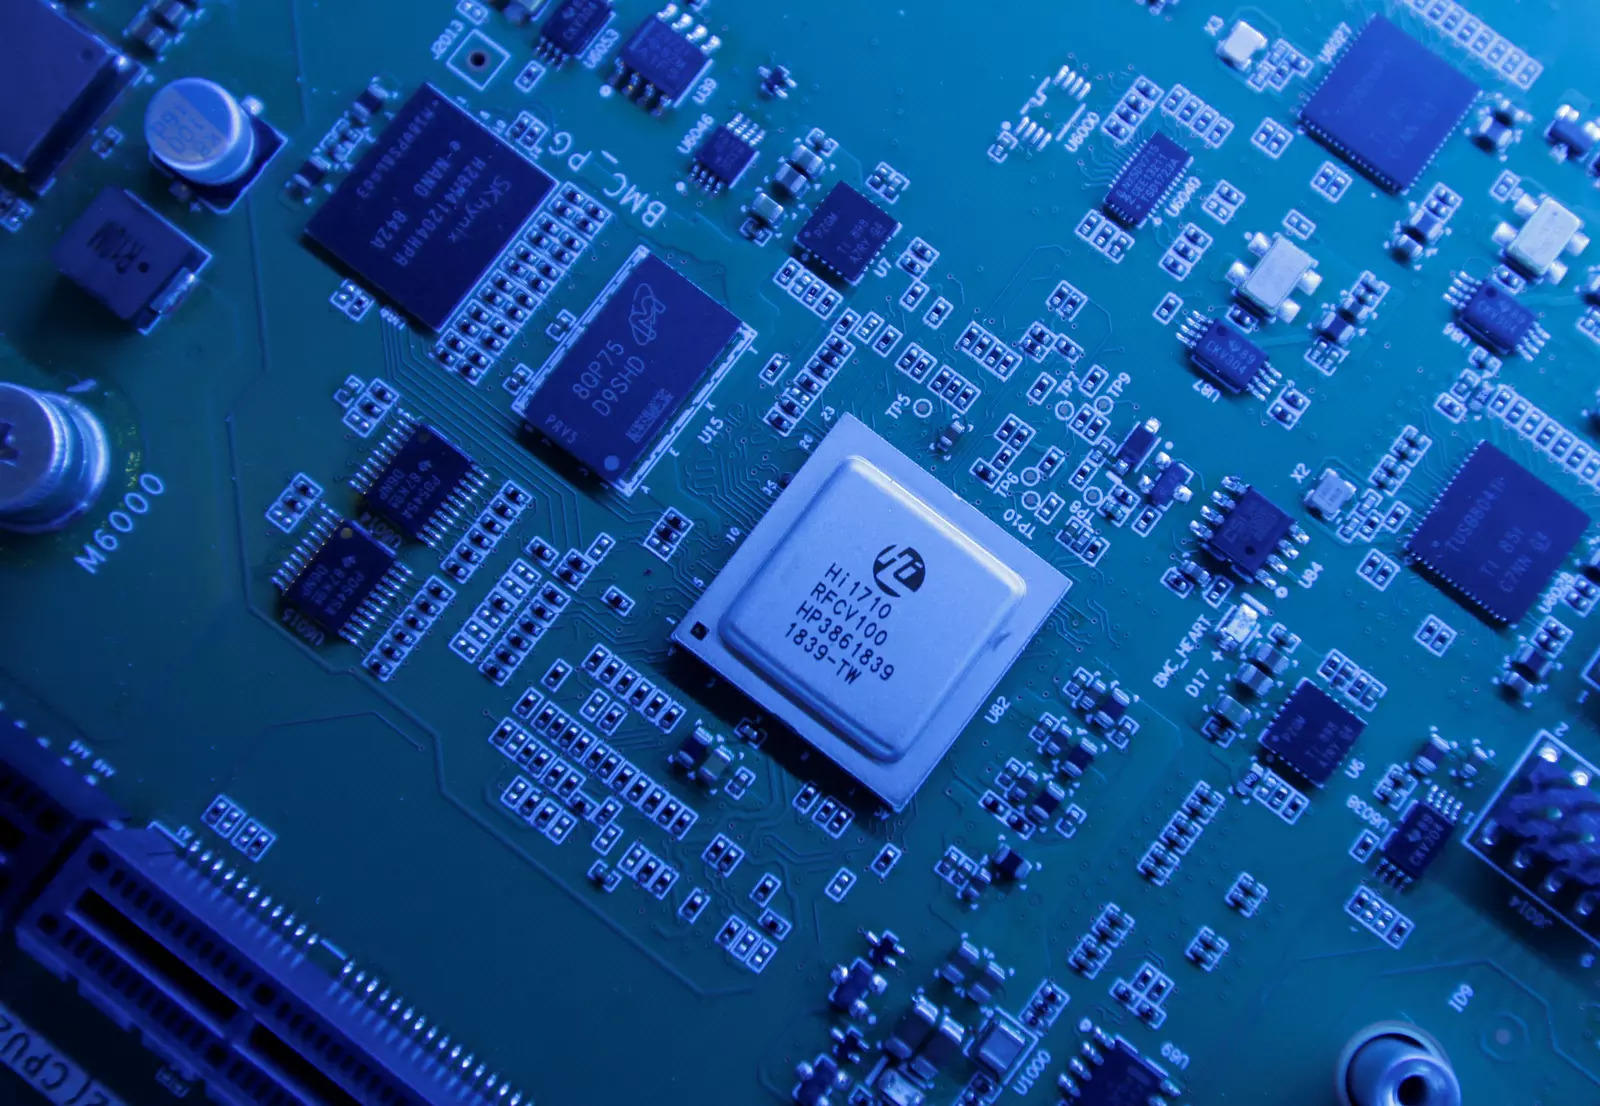  FILE PHOTO: Hi1710 BMC management chip is seen on a Kunpeng 920 chipset designed by Huawei's Hisilicon subsidiary is on display at Huawei's headquarters in Shenzhen, Guangdong province, China May 29, 2019. Picture taken May 29, 2019. REUTERS/Jason Lee